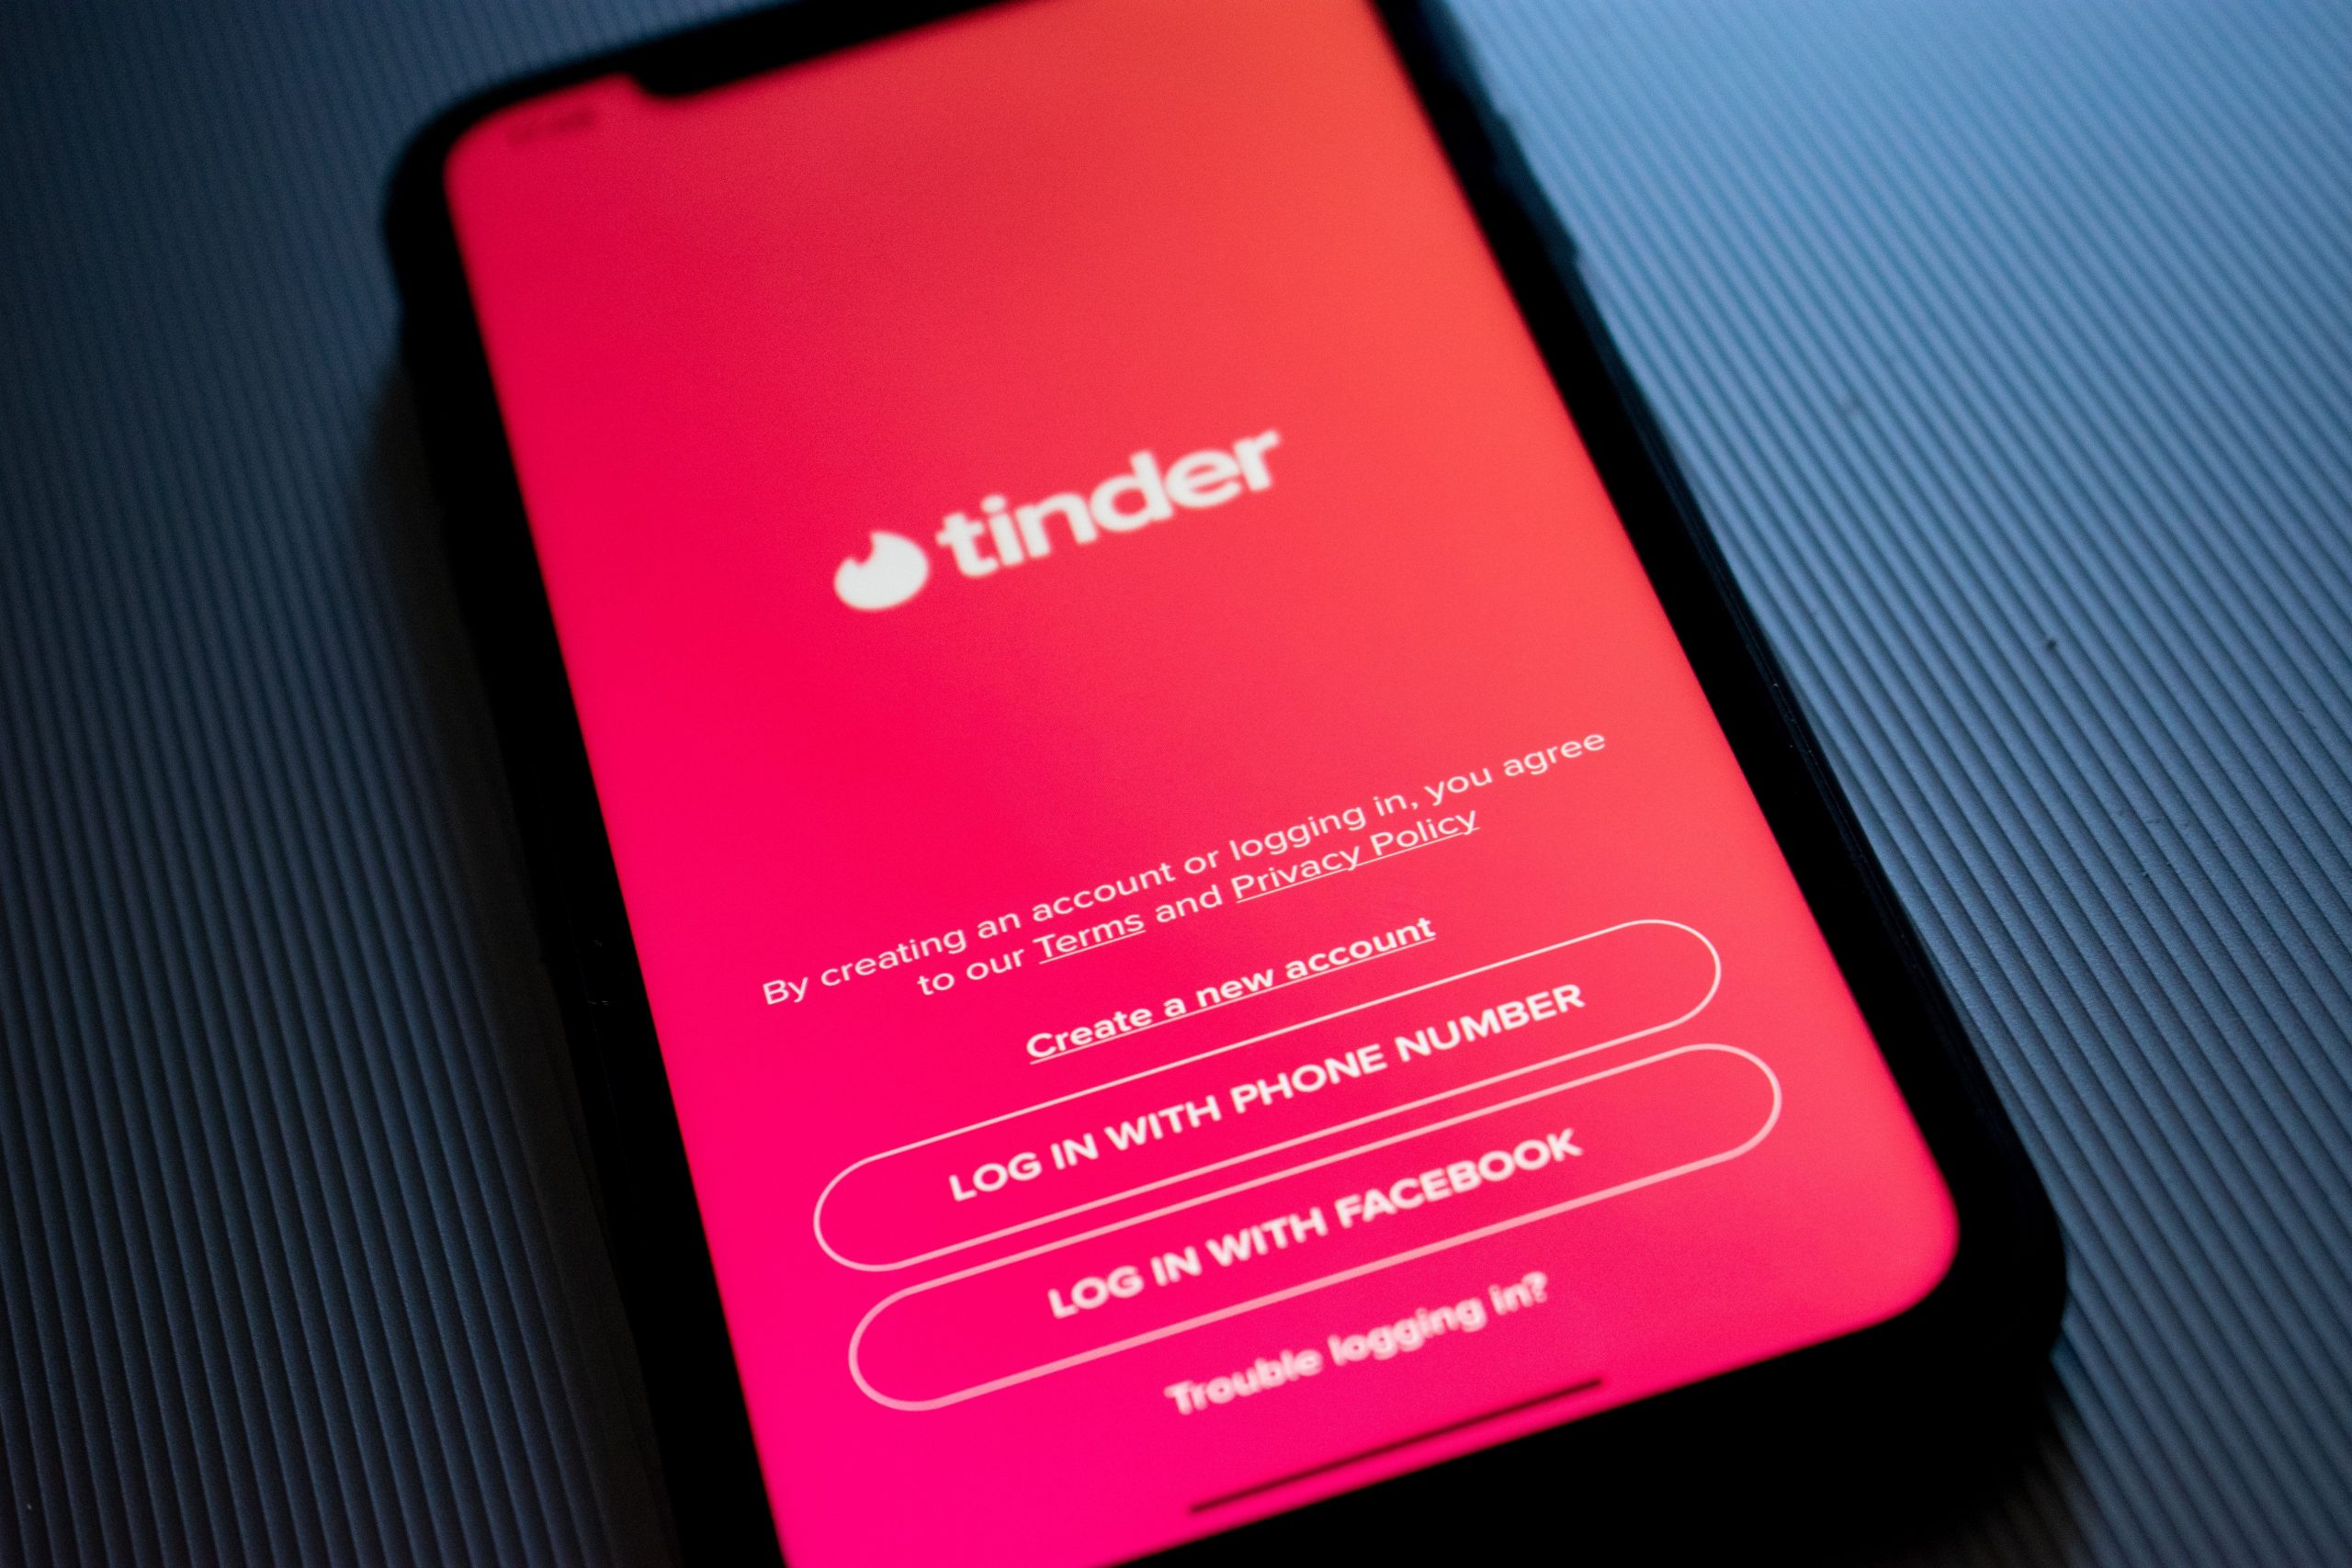 Online dating apps have transformed the way people look at love: Study